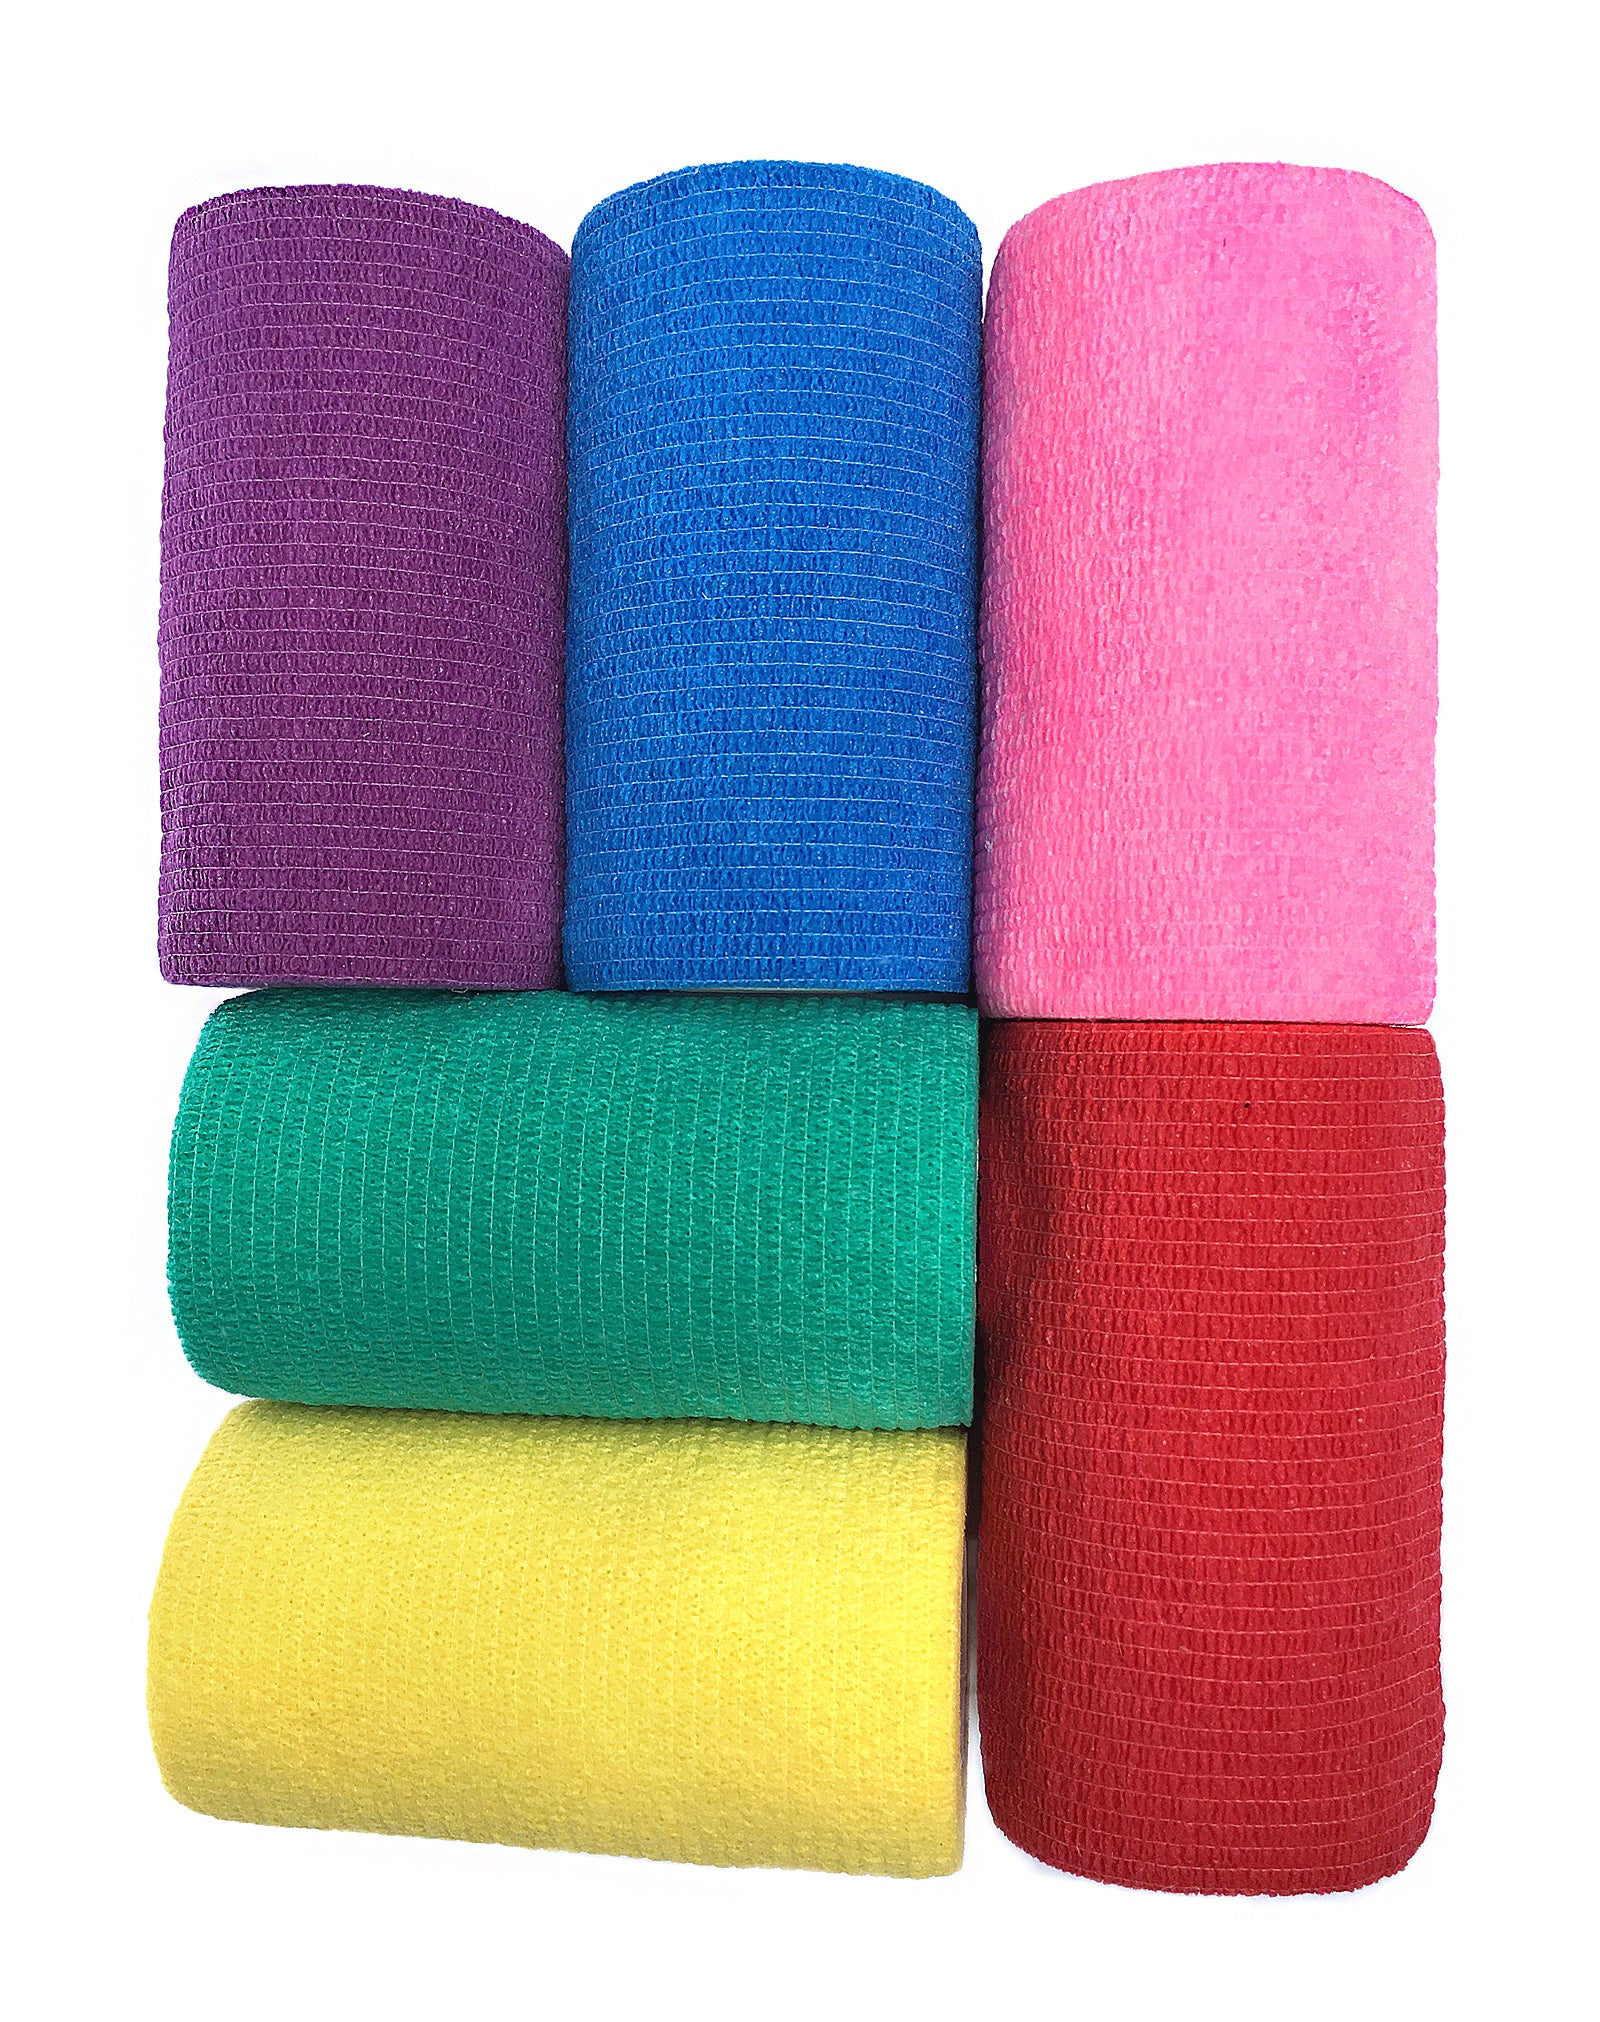 WildCow 4 Inch 18 and 36 Roll Packs (6 Colors)